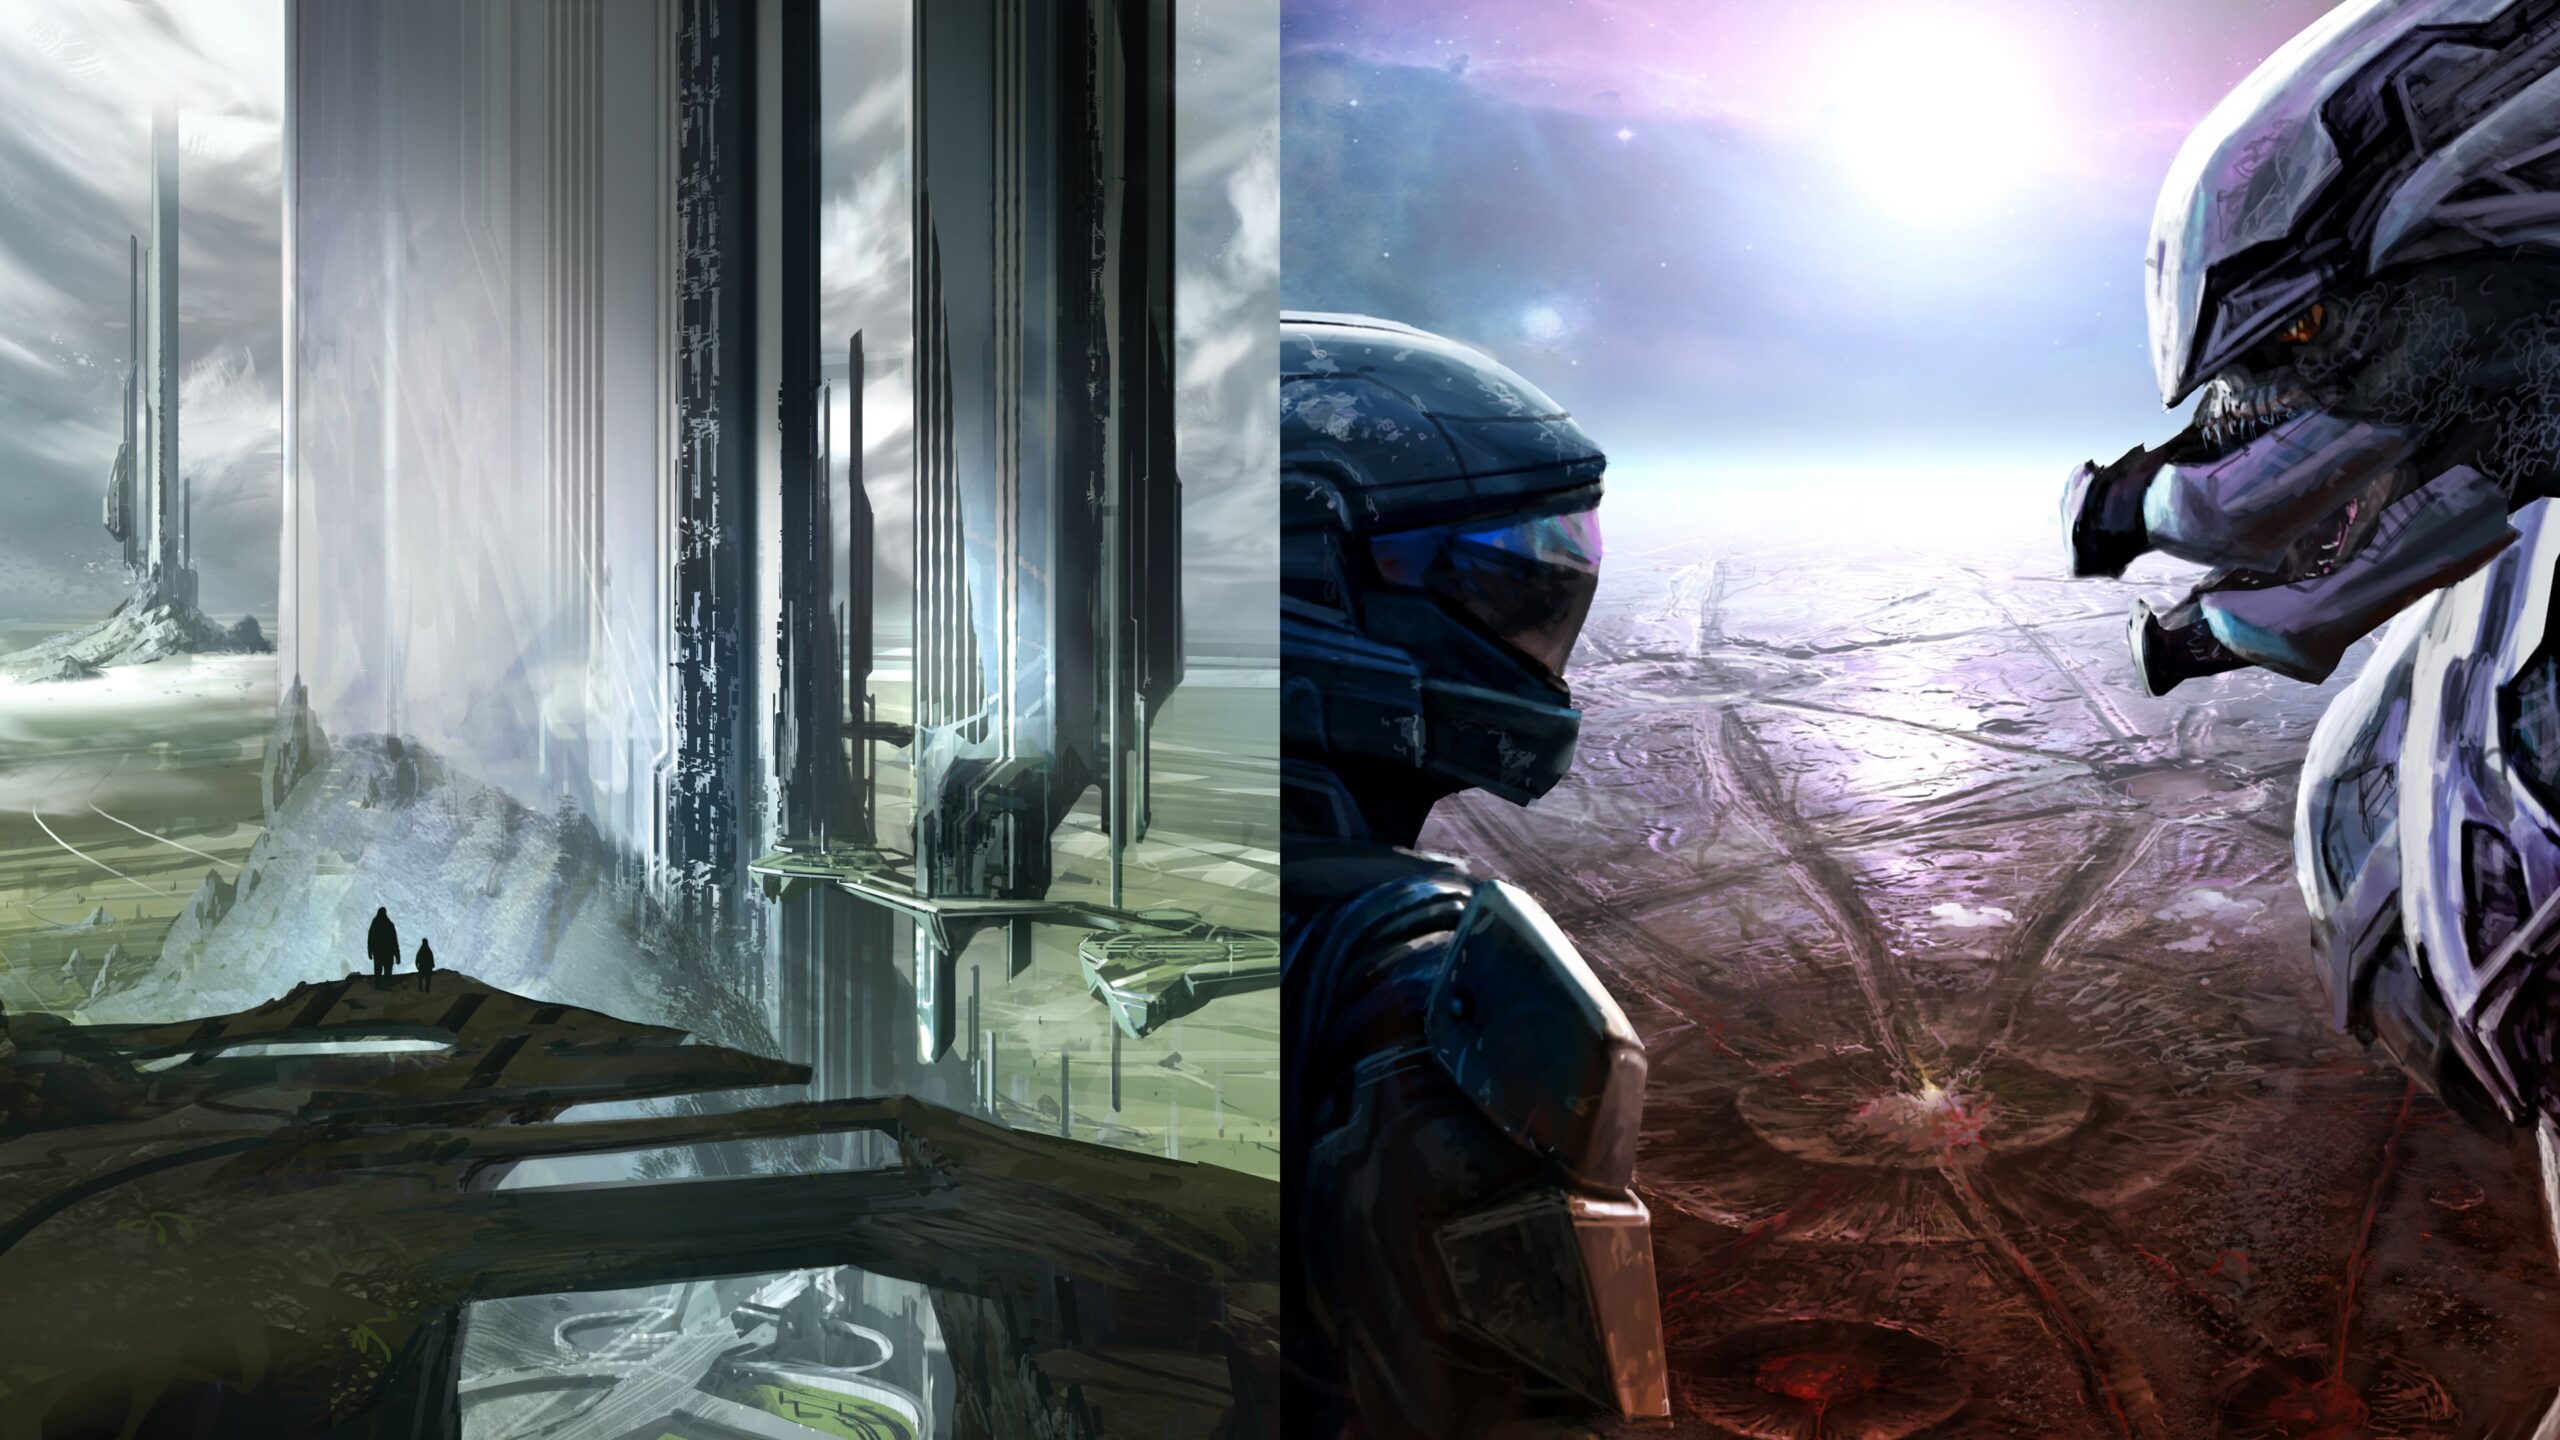 Cover art of the novels Halo: Cryptum and Halo: Glasslands